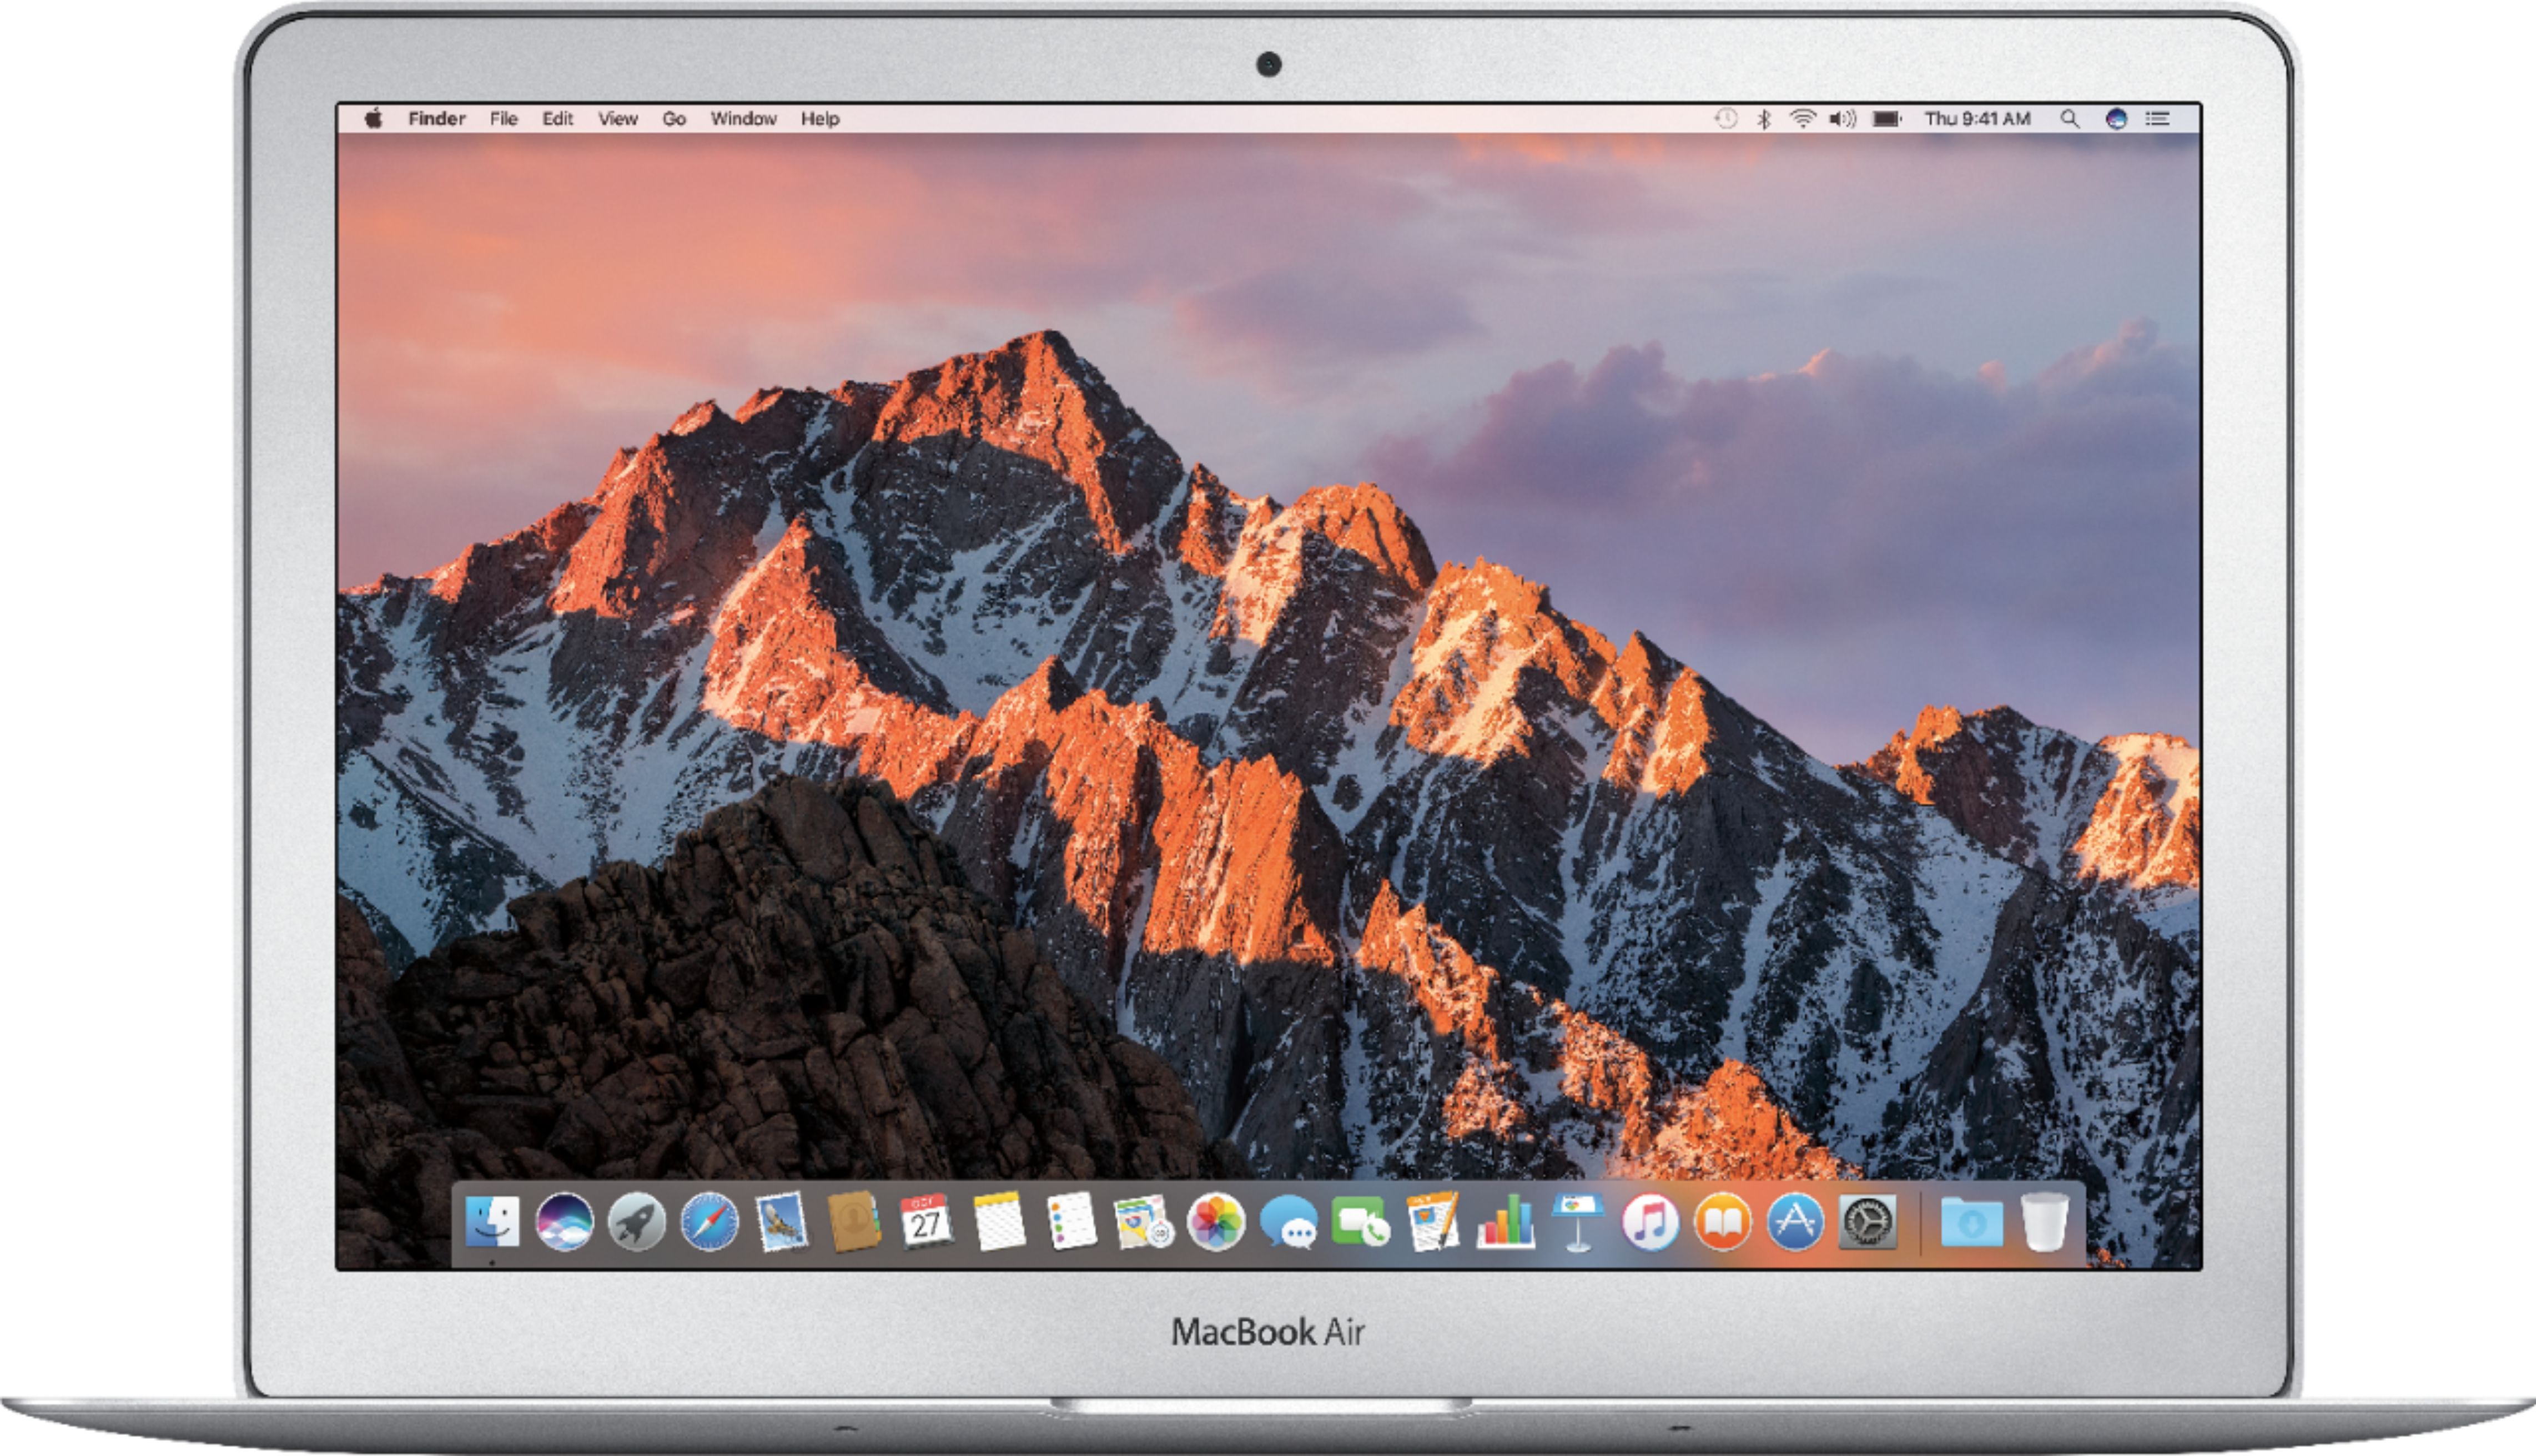 MacBook Air: History, specs, pricing, review, and deals - 9to5Mac